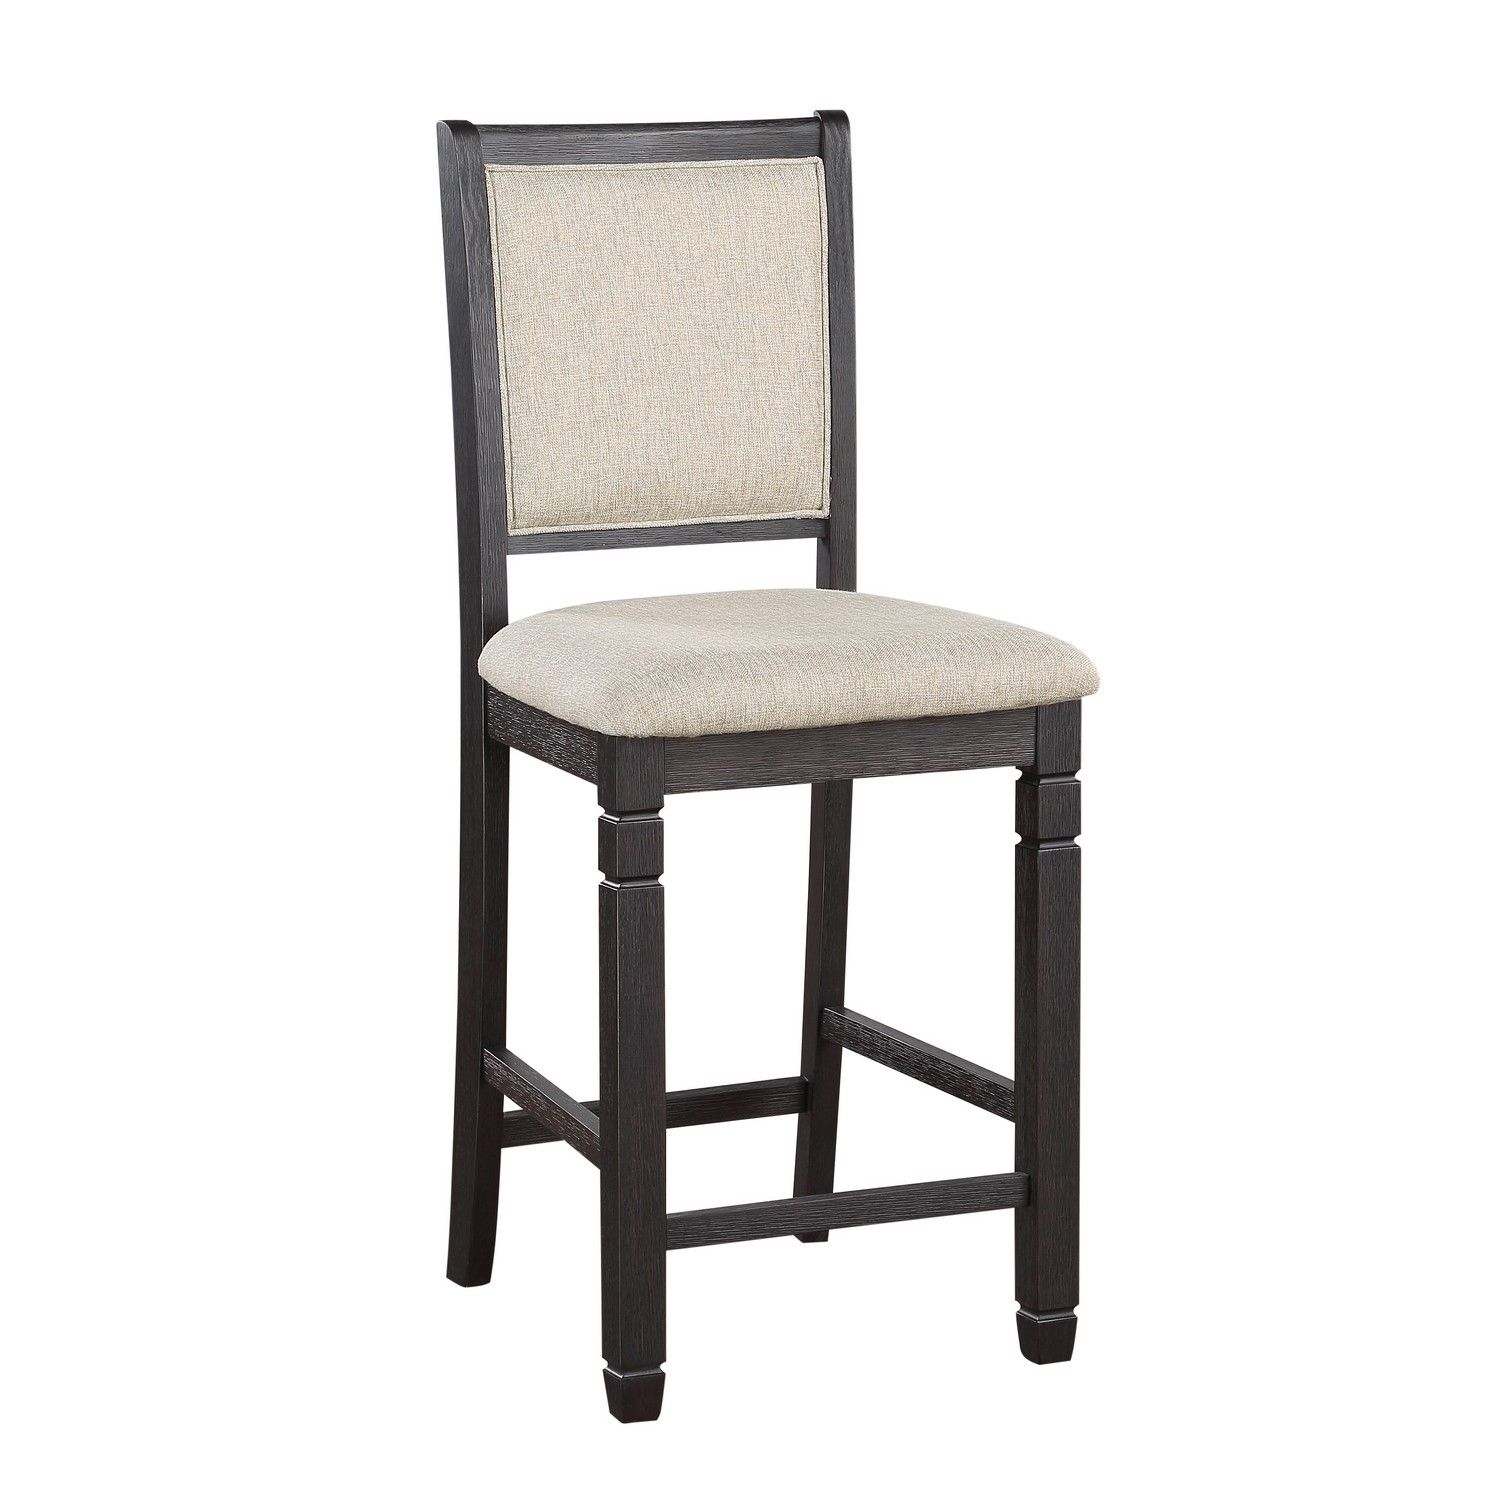 Homelegance Asher Counter Height Chair - Brown/Black